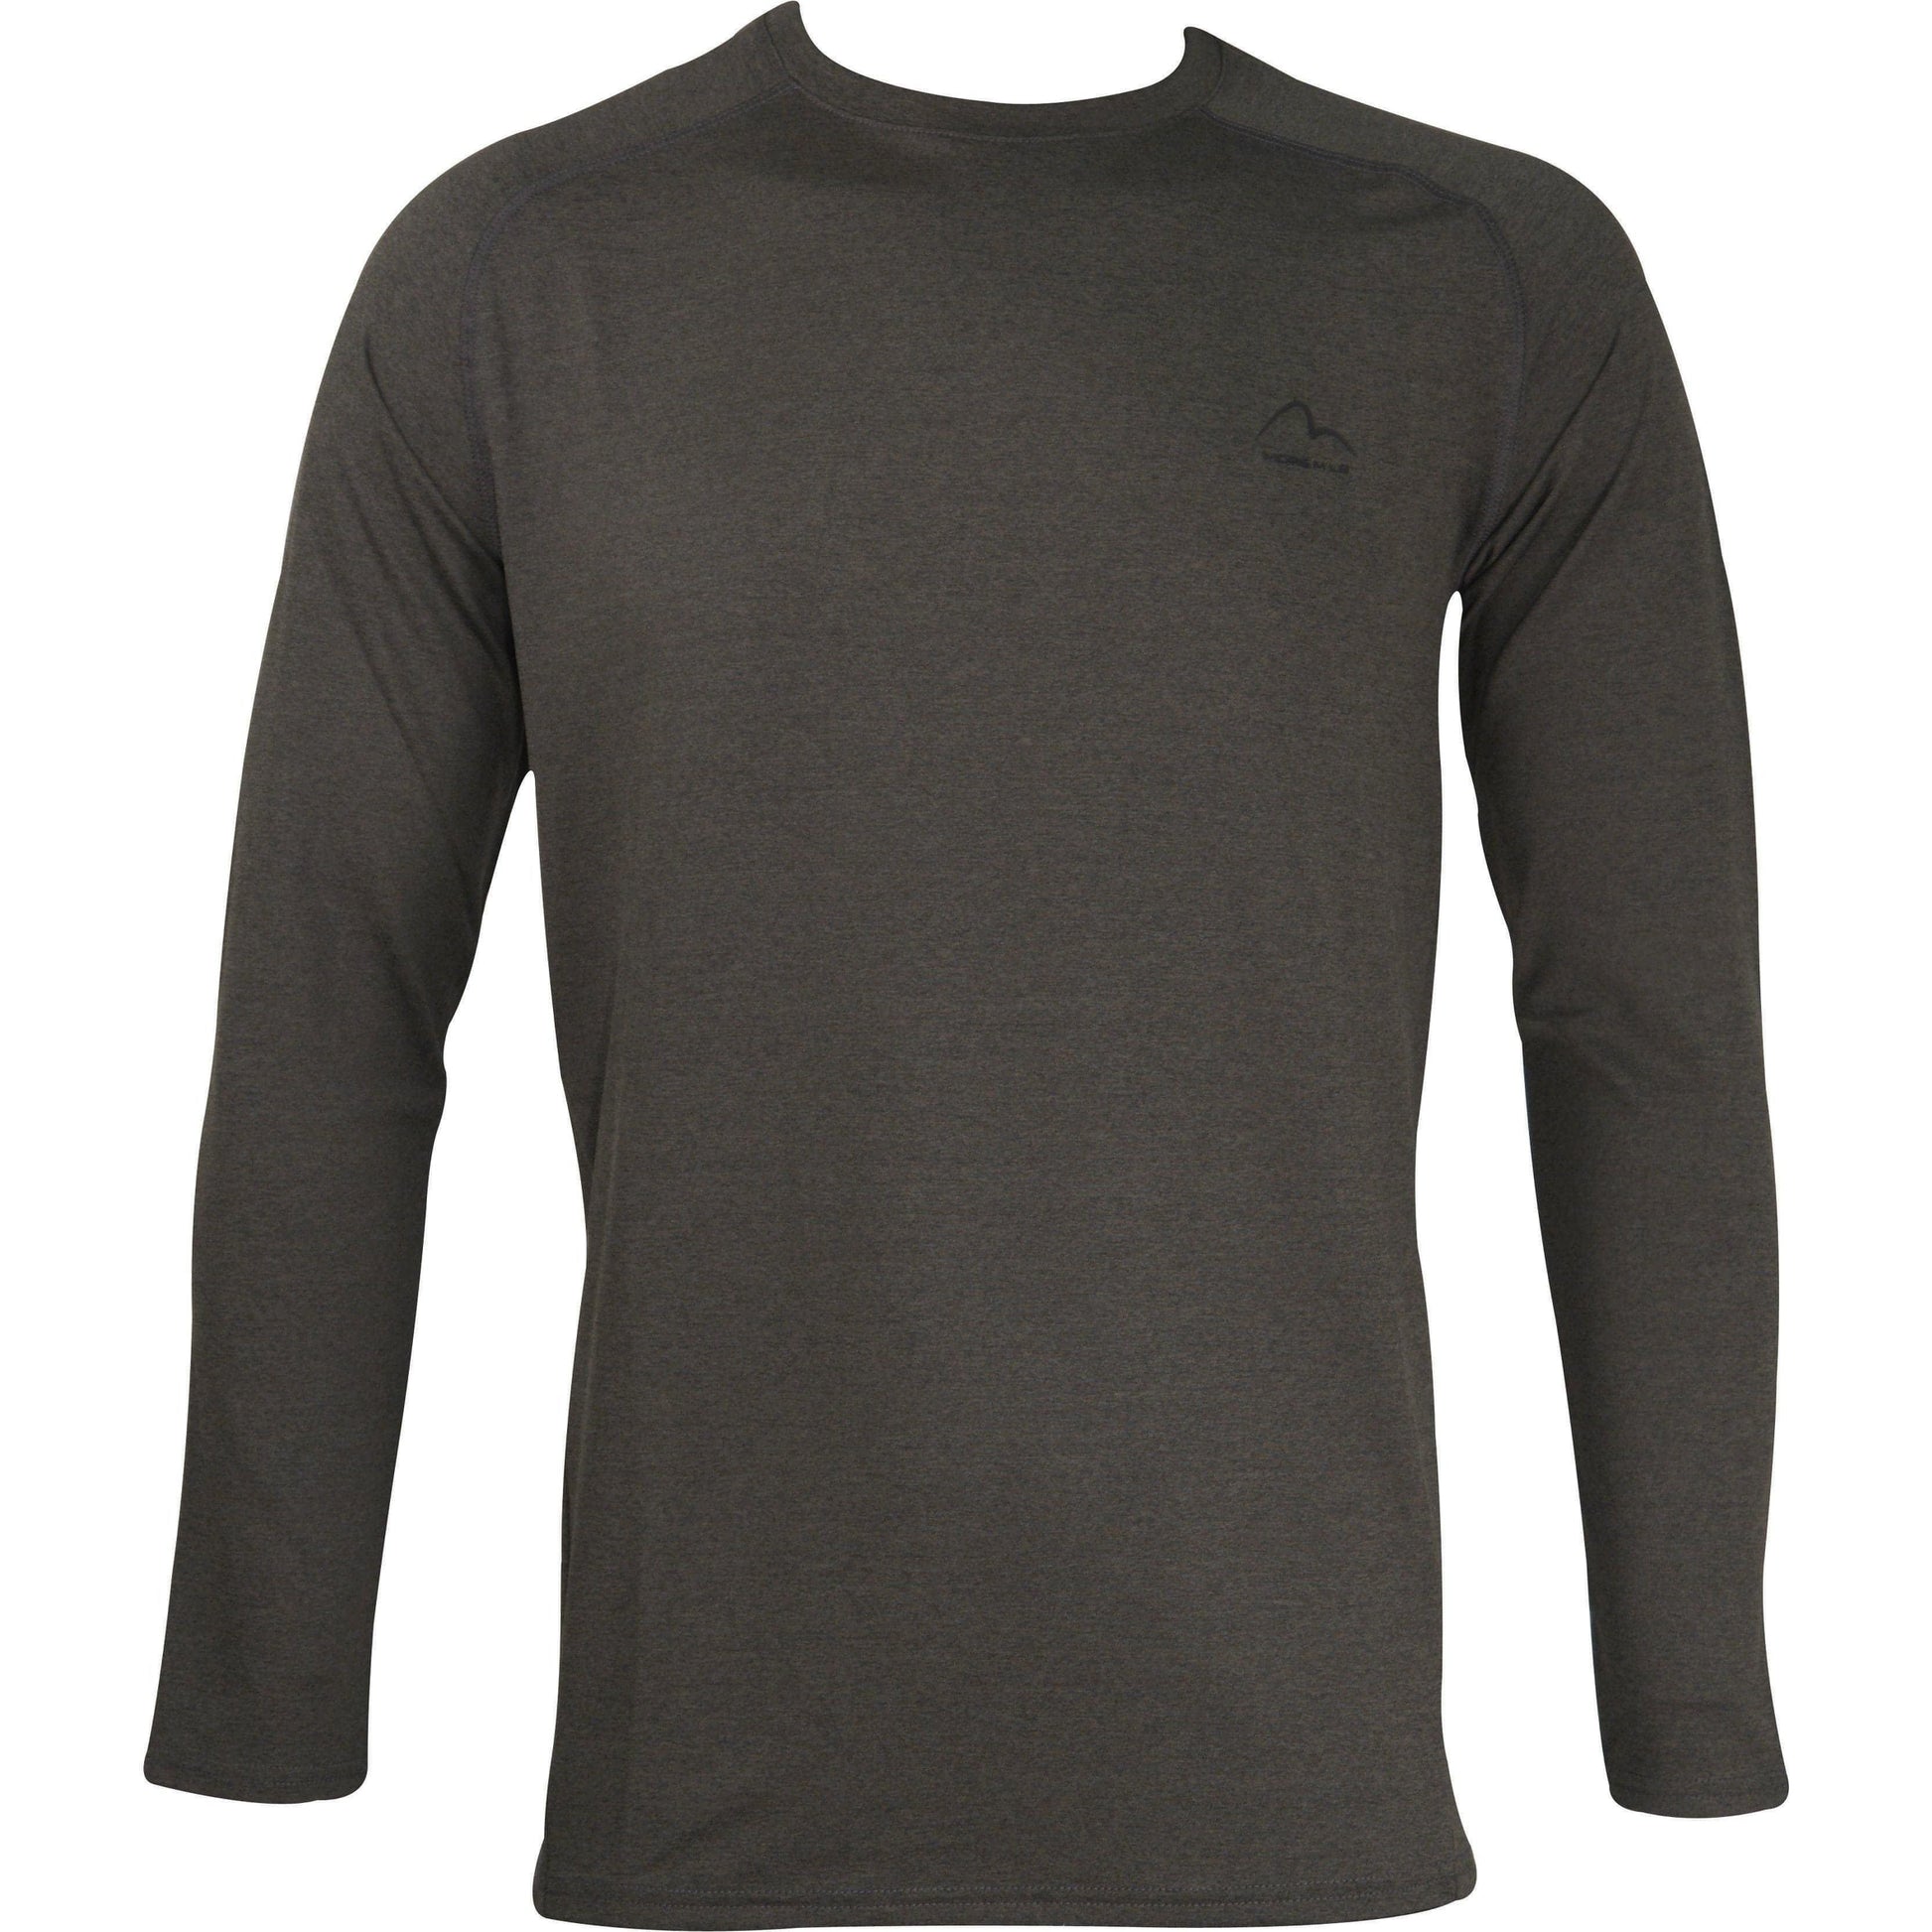 More Mile Train To Run Mens Long Sleeve Running Top - Grey 5055604363582 - Start Fitness